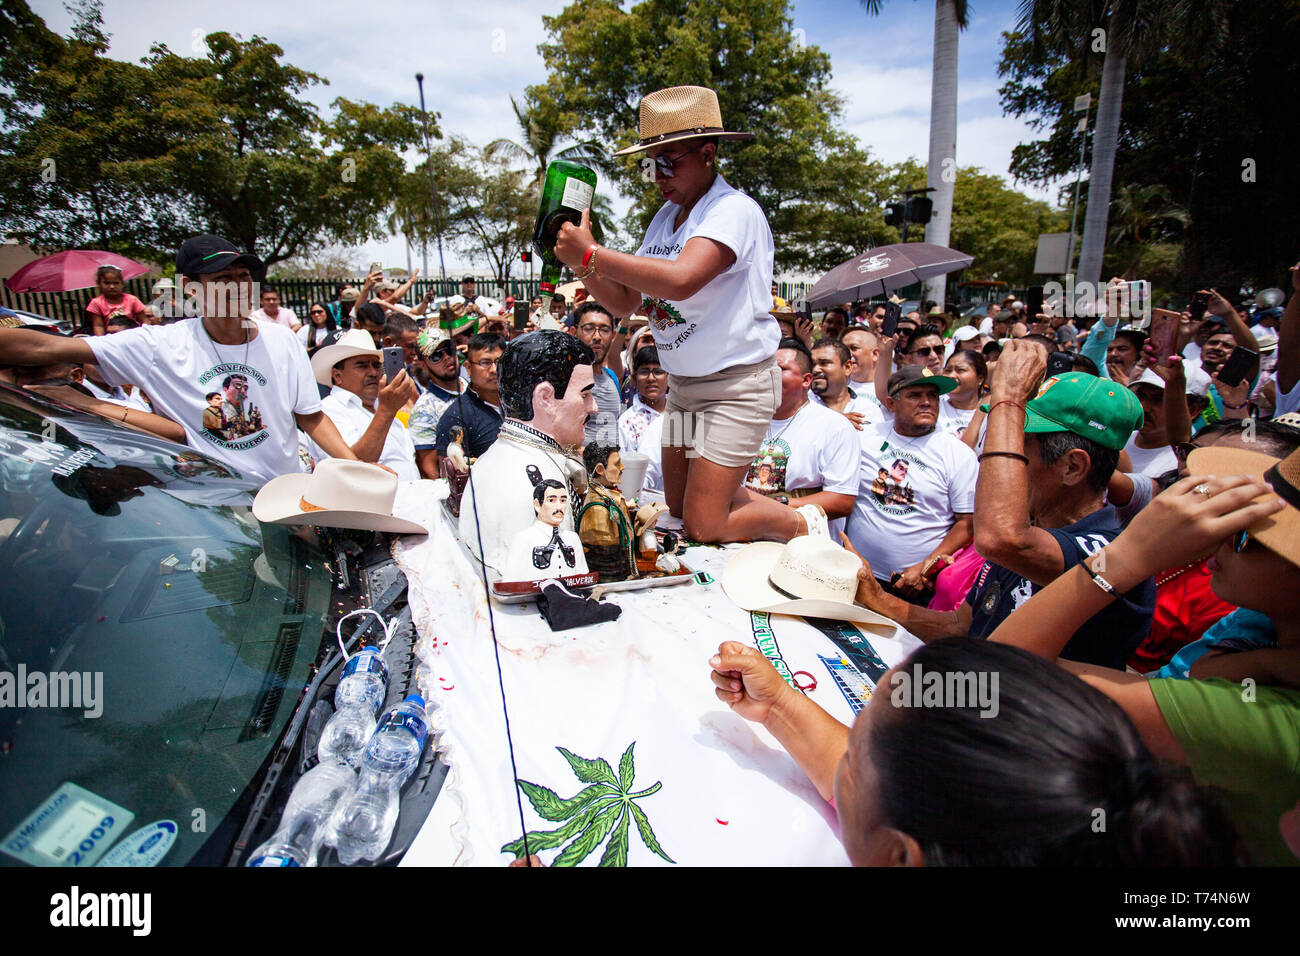 Culiacan, Mexico. 03rd May, 2019. Believers pour whisky over the bust of Jesus Malverde, who is considered a saint of drug bosses in Mexico. On the occasion of his 110th anniversary of death on 03.05.2019 numerous faithful gathered in his native town in the federal state of Sinaloa. Malverde, who is not recognized as a saint by the Catholic Church, is said to have been a highwayman during his lifetime. Many Mexicans worship him as a kind of Robin Hood. According to oral tradition, he robbed the rich families in the Sinaloa region and then distributed the booty among the poor. Credit: dpa pictu Stock Photo